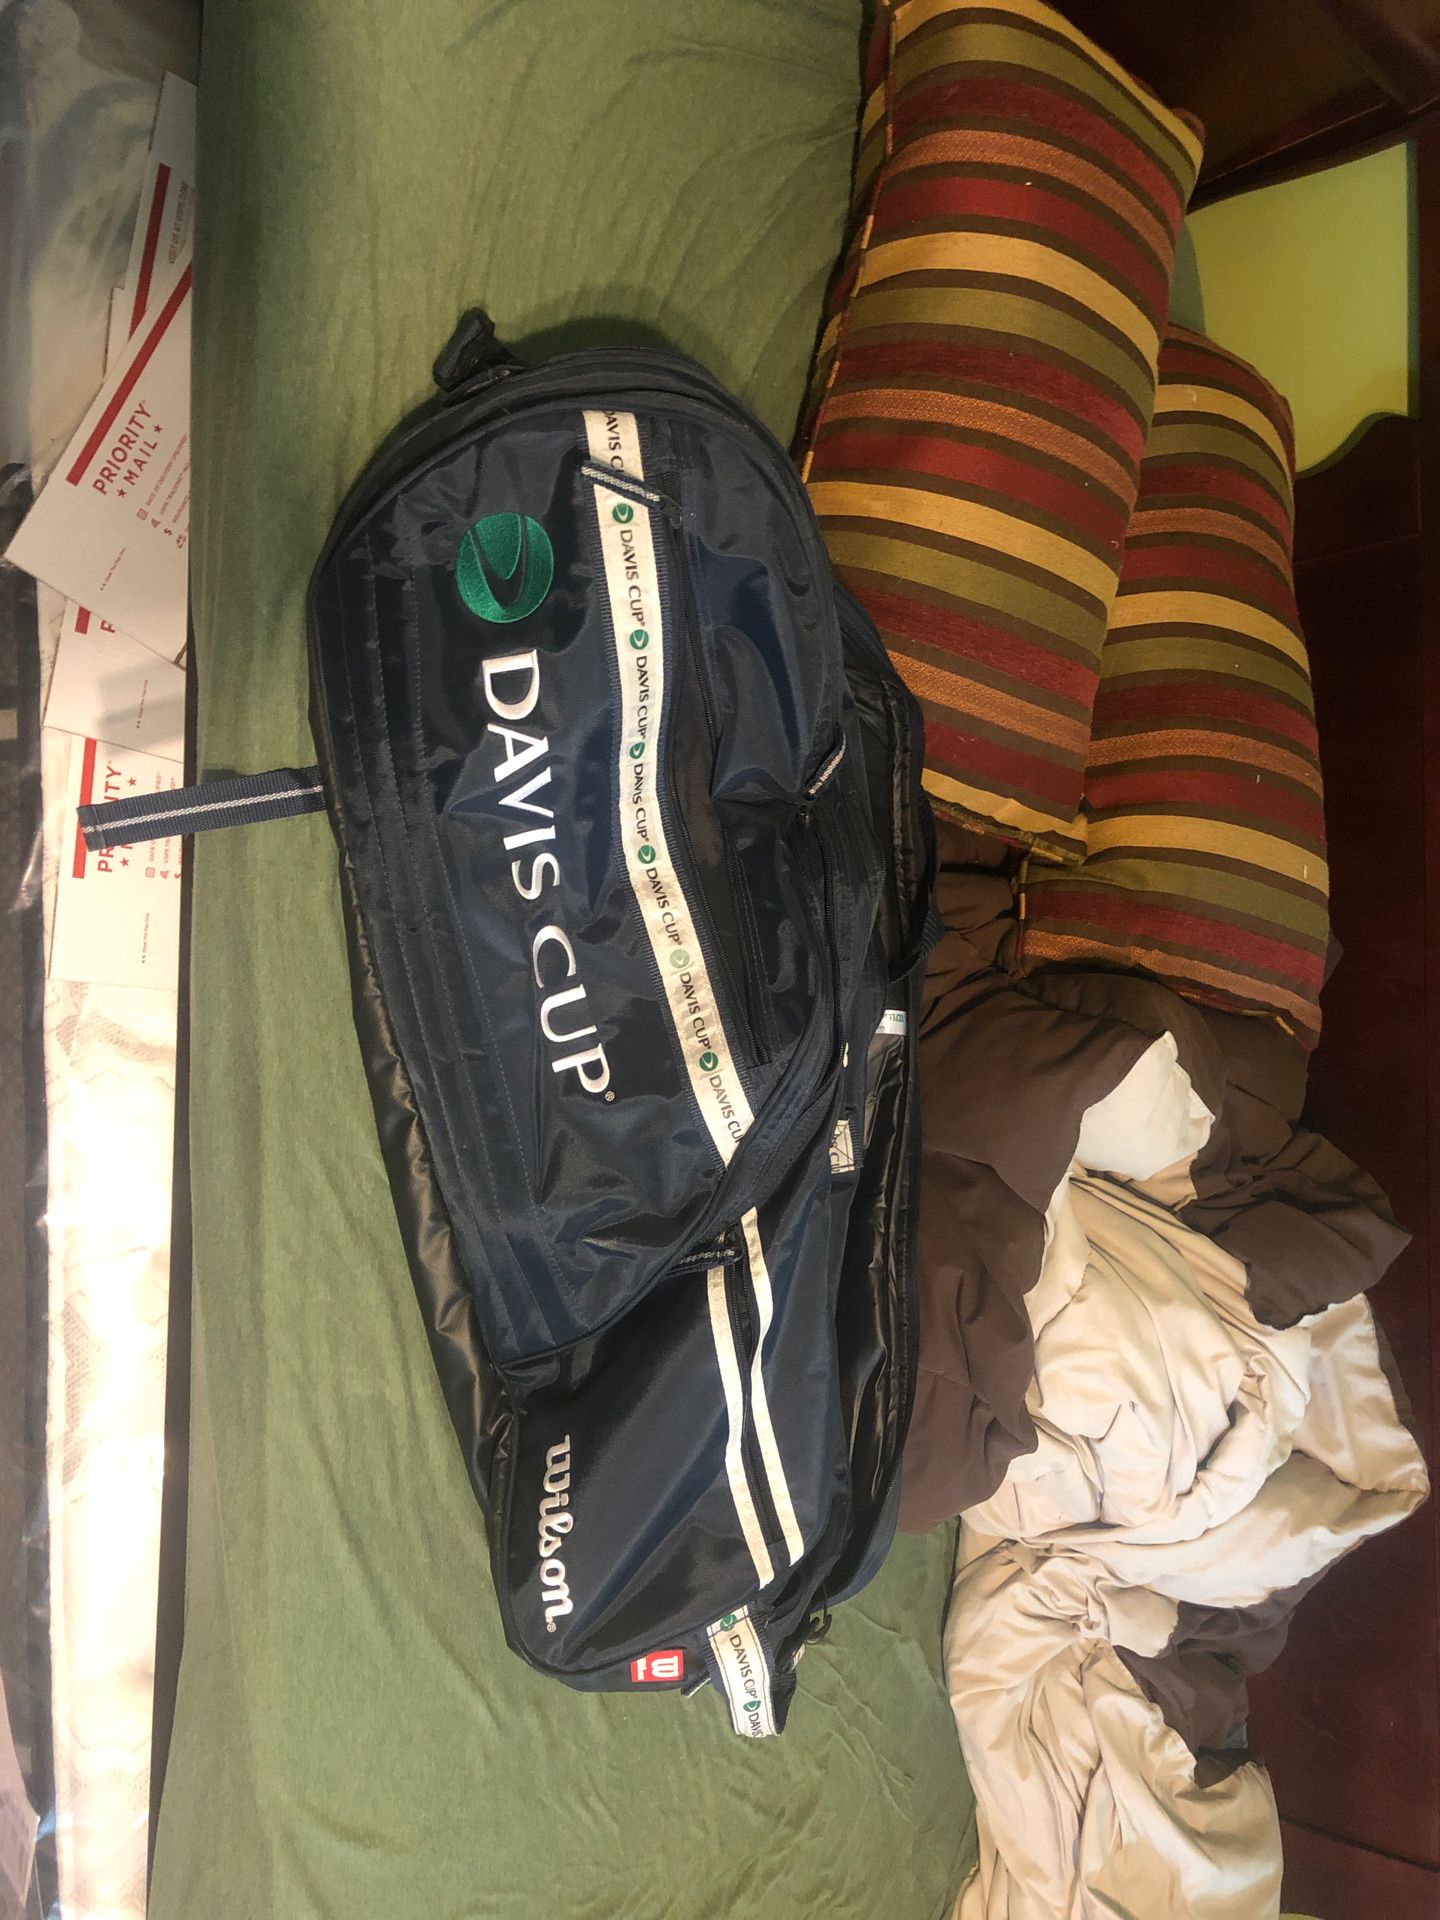 Wilson tennis bag and backpack Davis cup